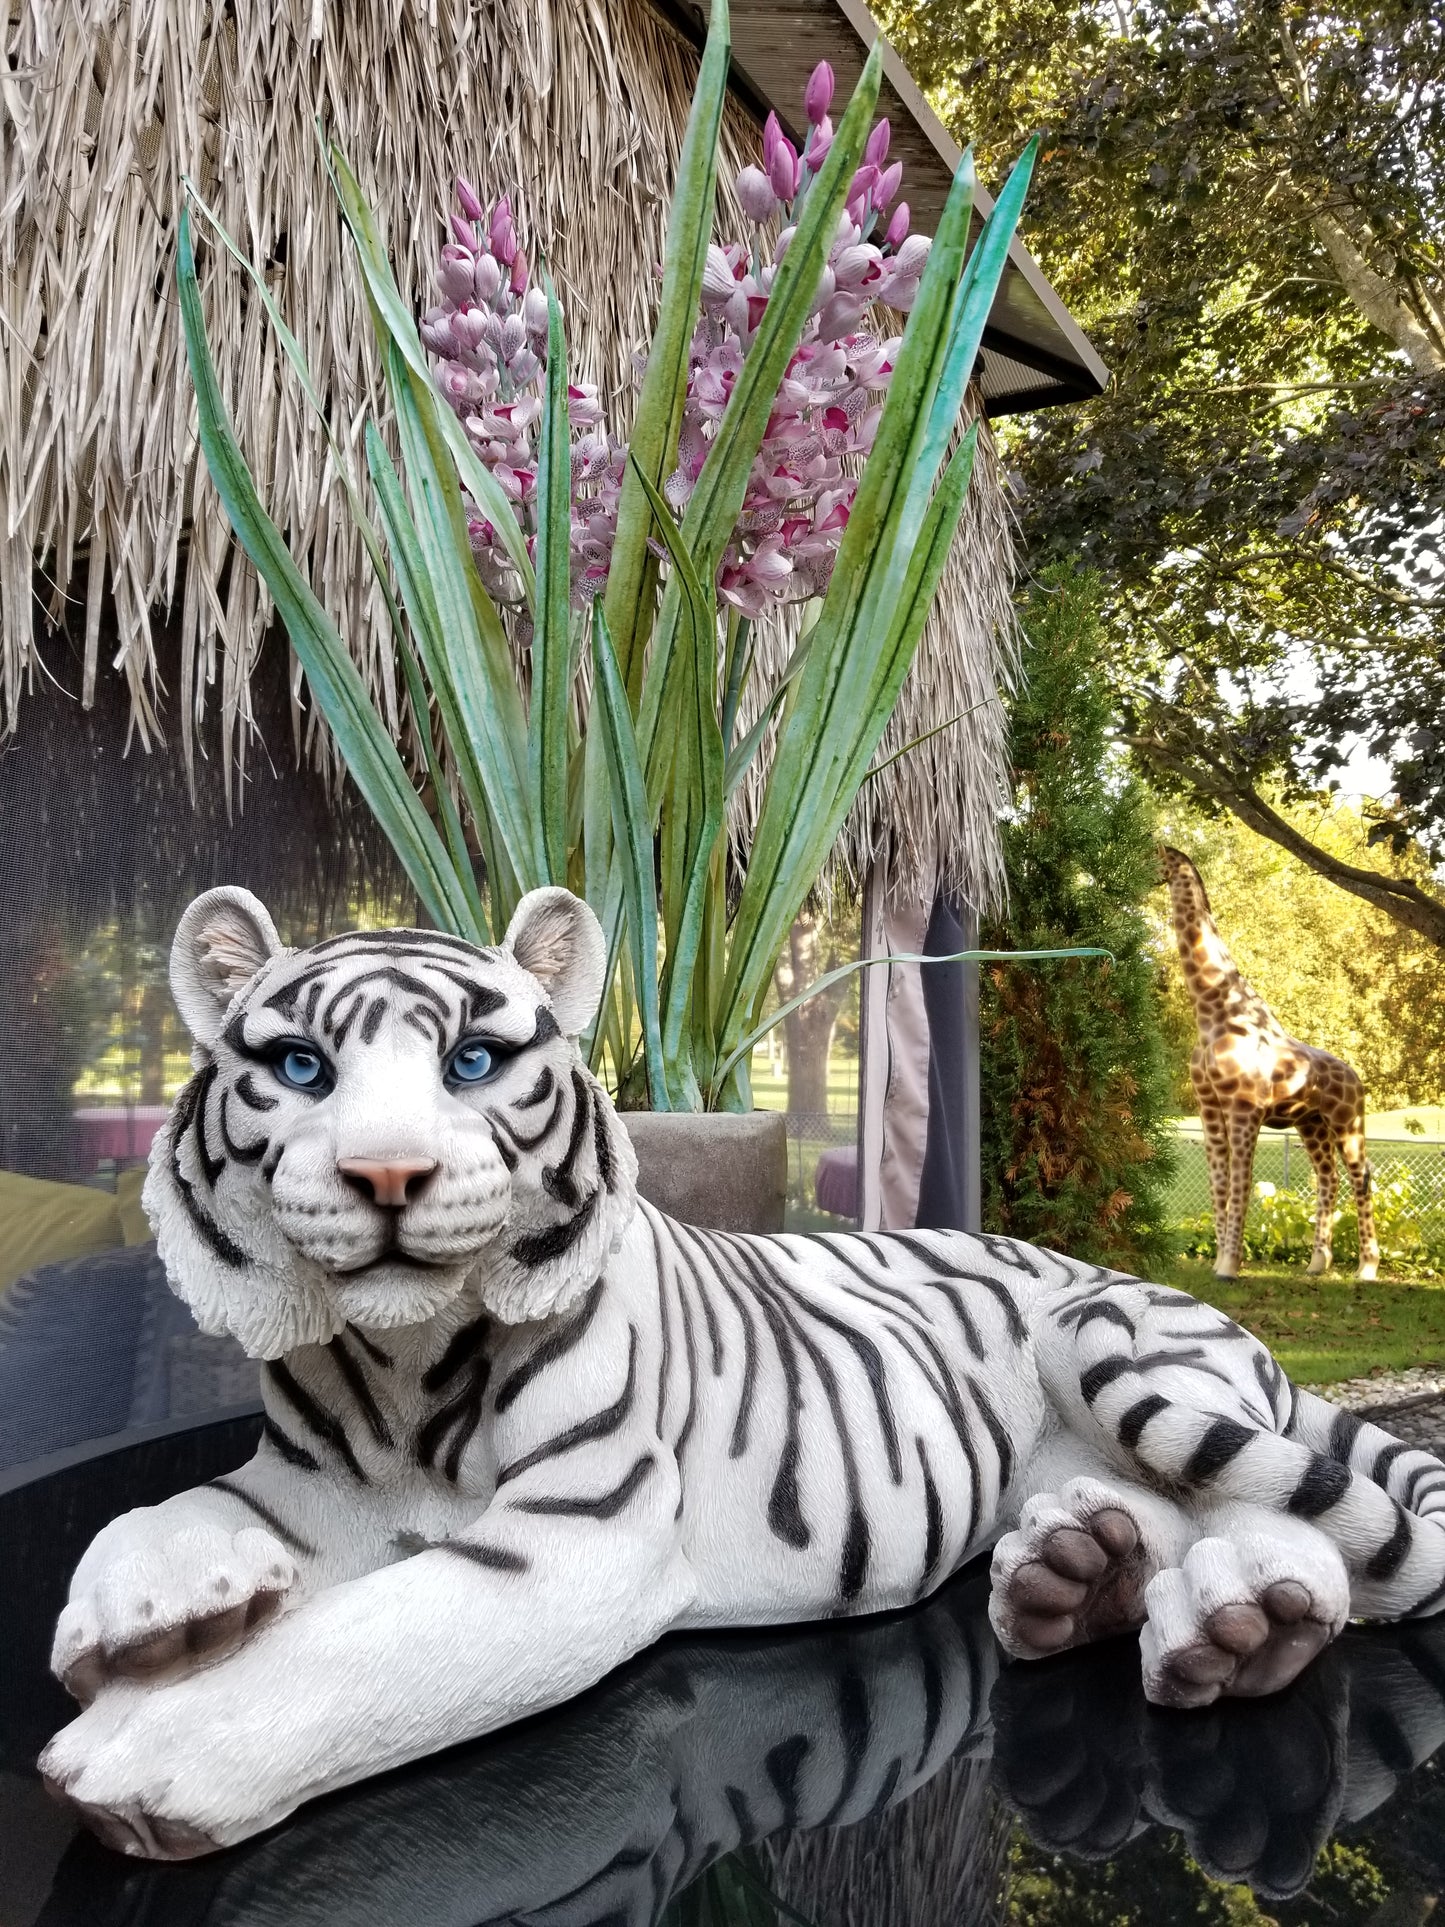 buy a white tiger statue at auction